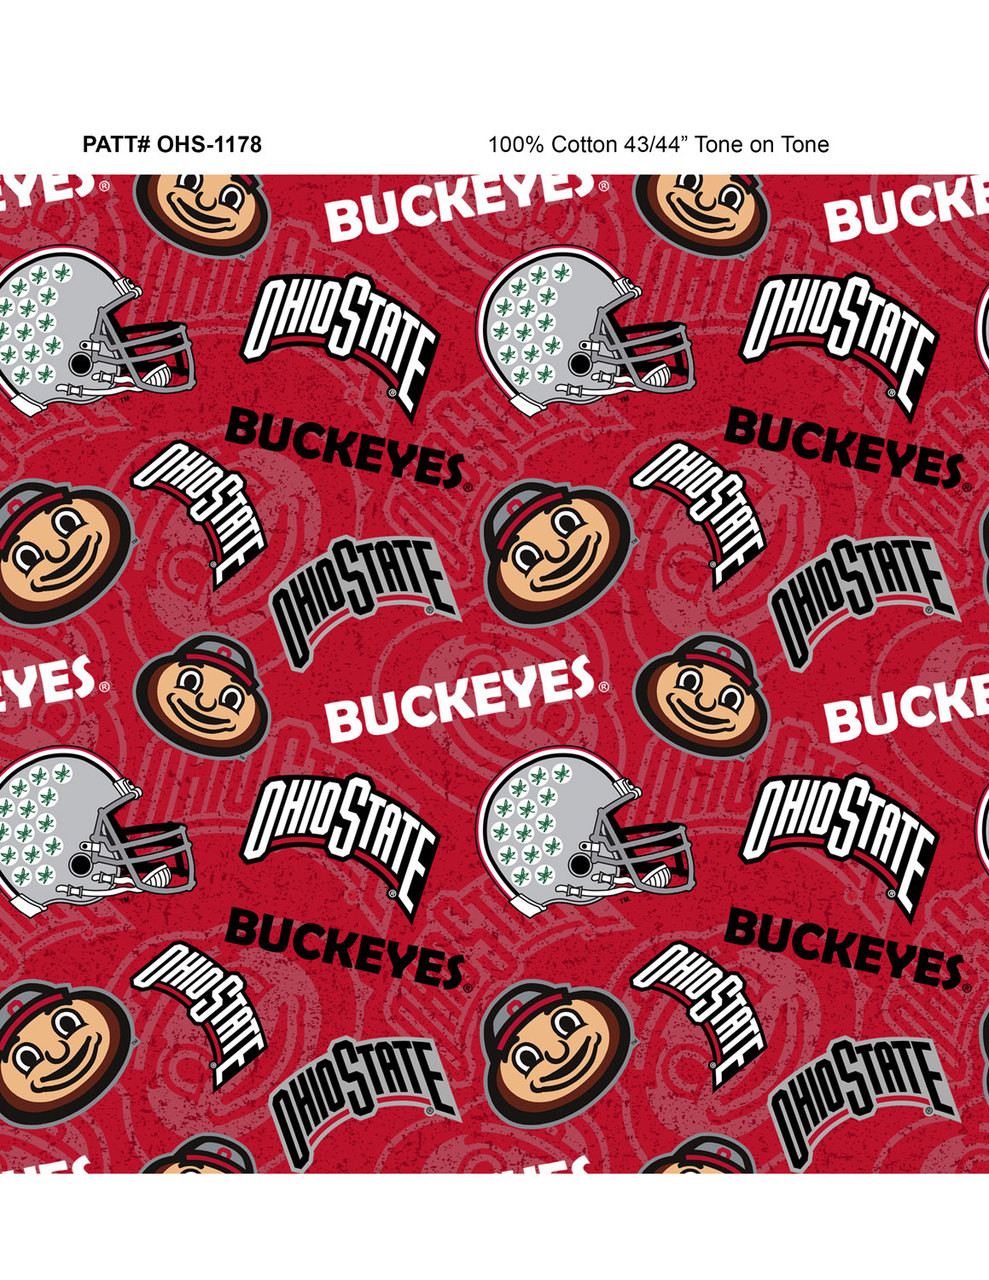 Ohio State University Buckeyes Cotton Fabric with Tone On Tone Print or Matching Solid Cotton Fabrics